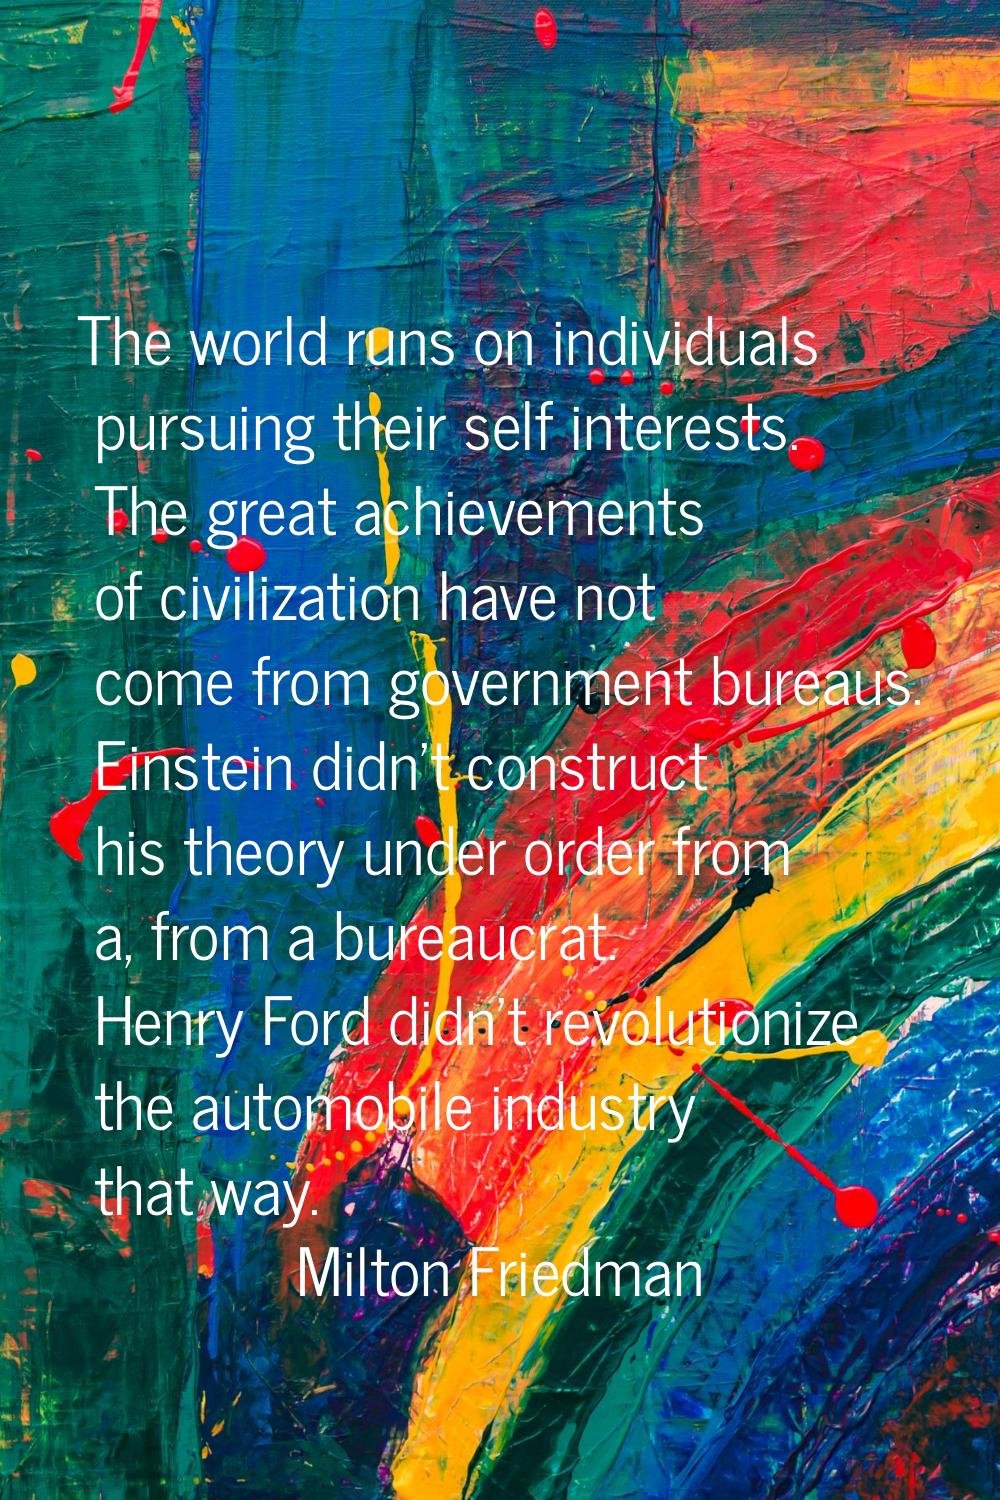 The world runs on individuals pursuing their self interests. The great achievements of civilization